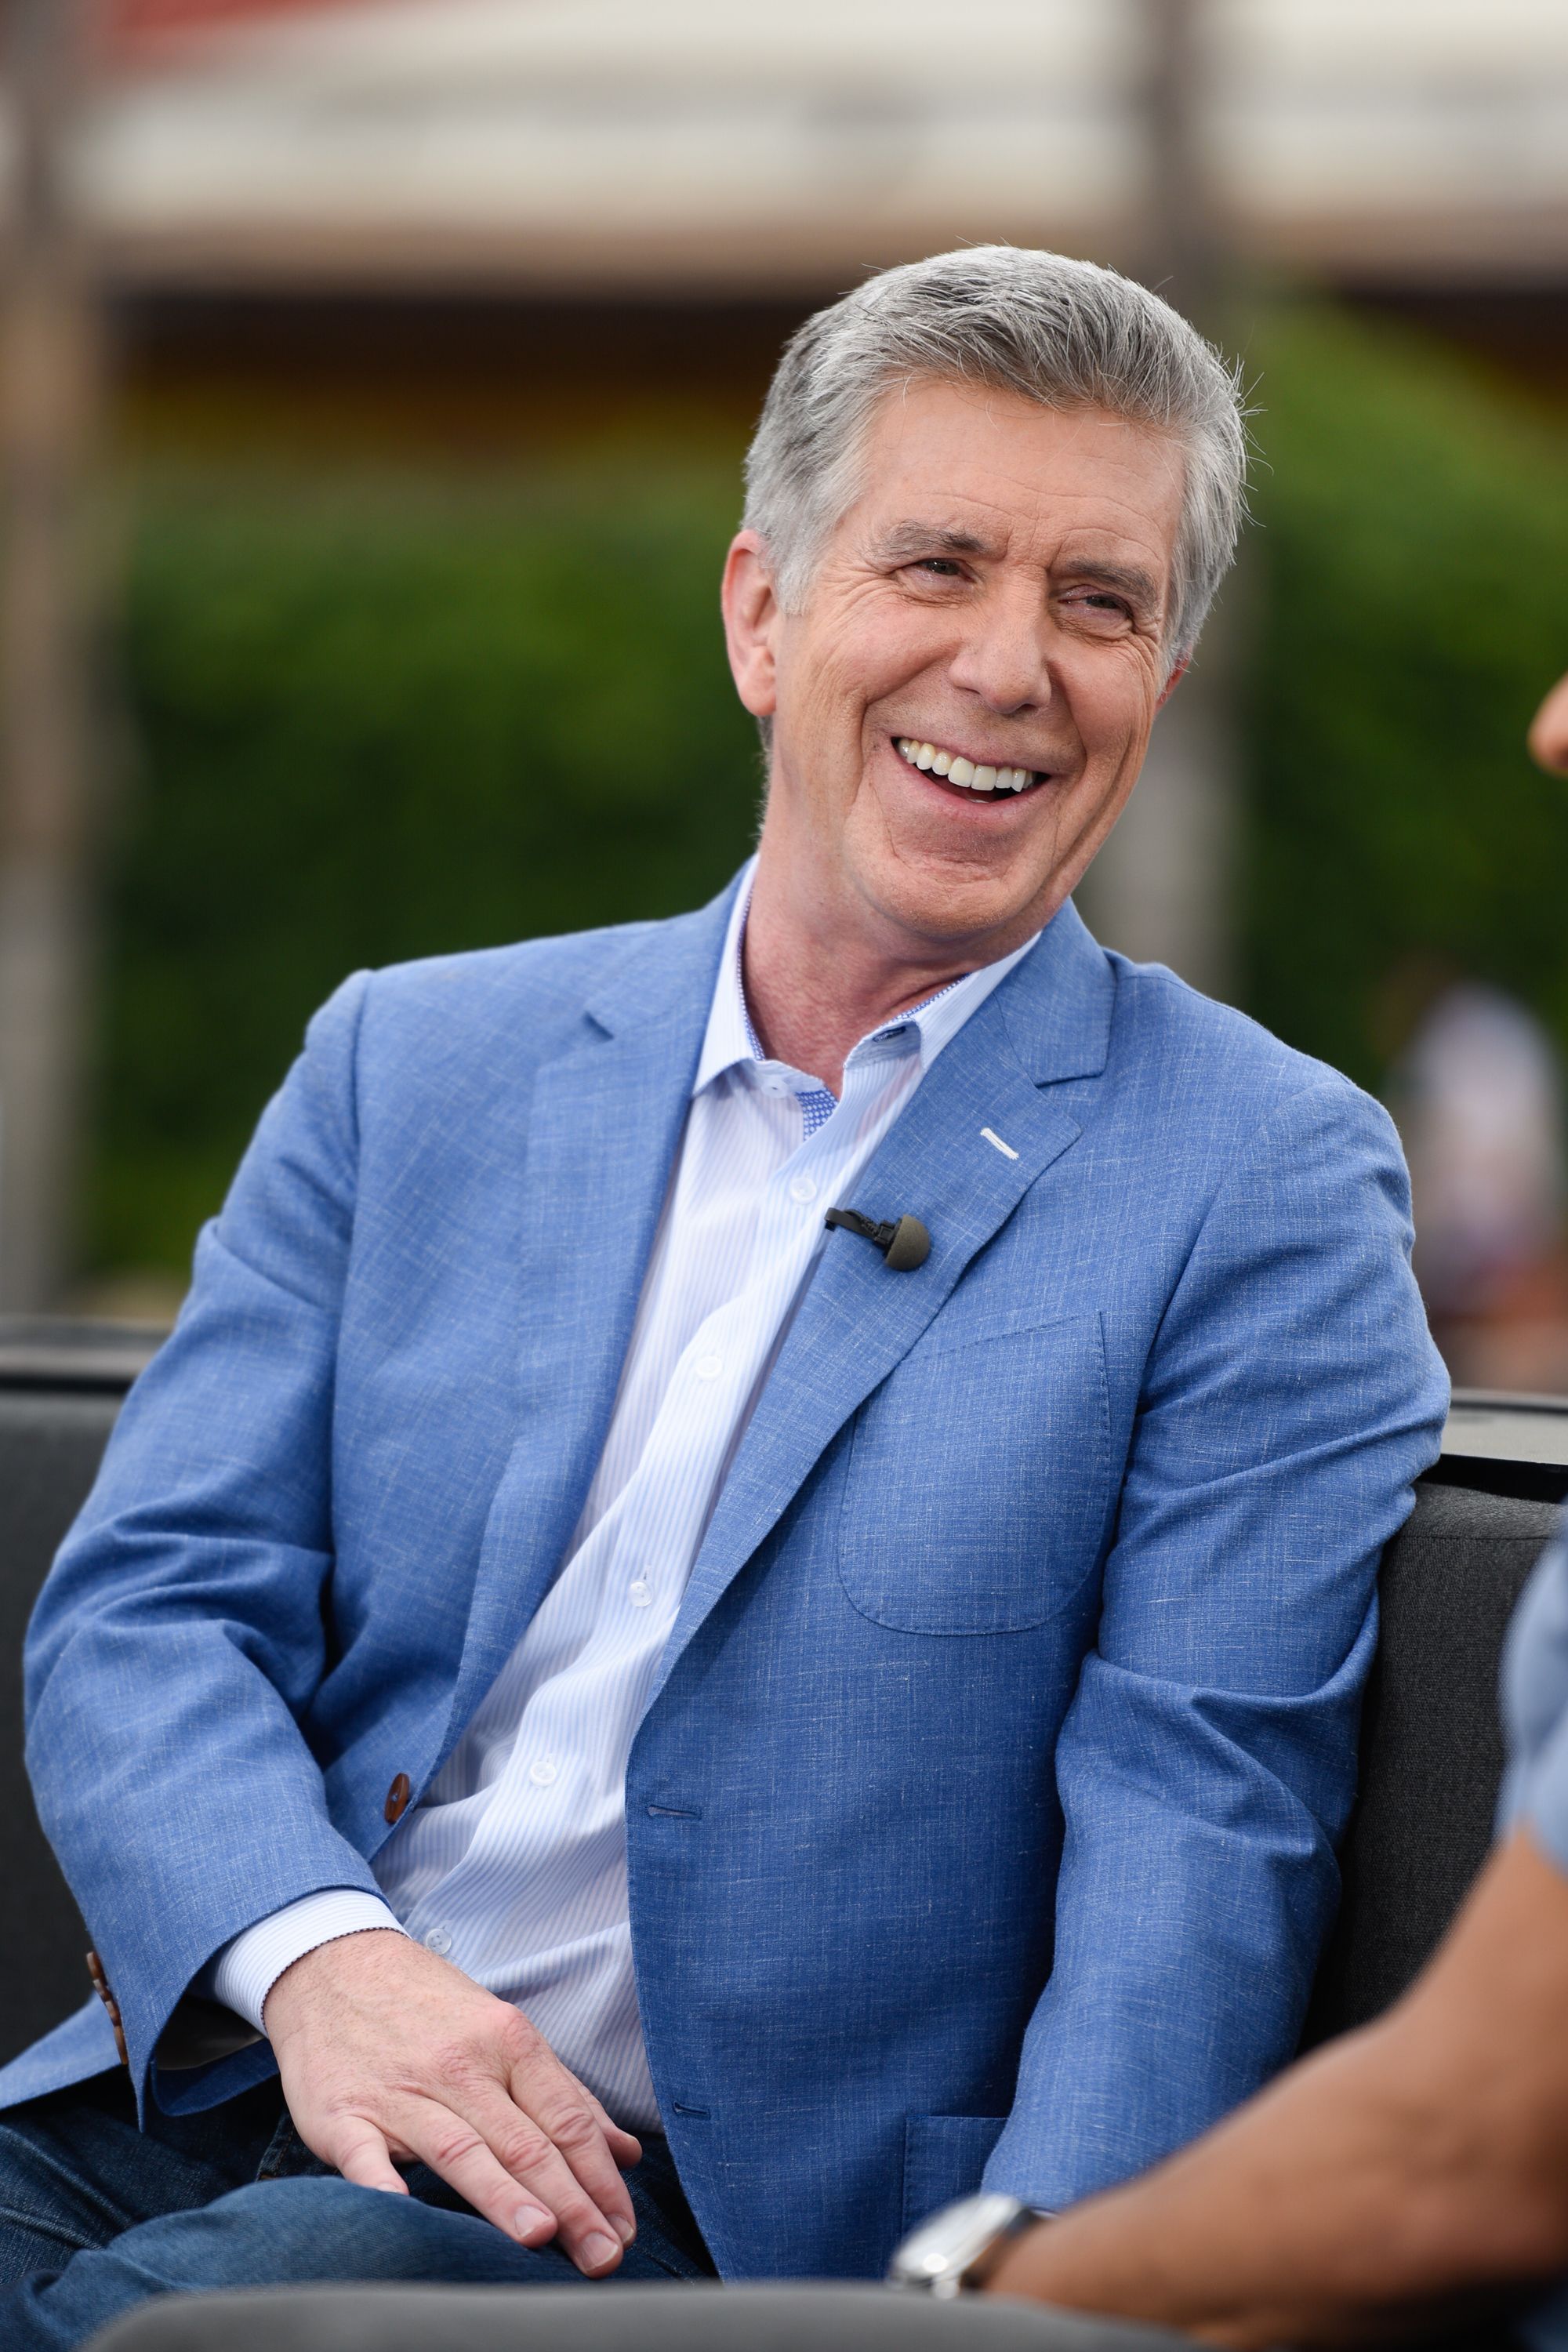 Tom Bergeron visits "Extra" at Universal Studios Hollywood on May 11, 2016, in Universal City, California | Photo: Noel Vasquez/Getty Images